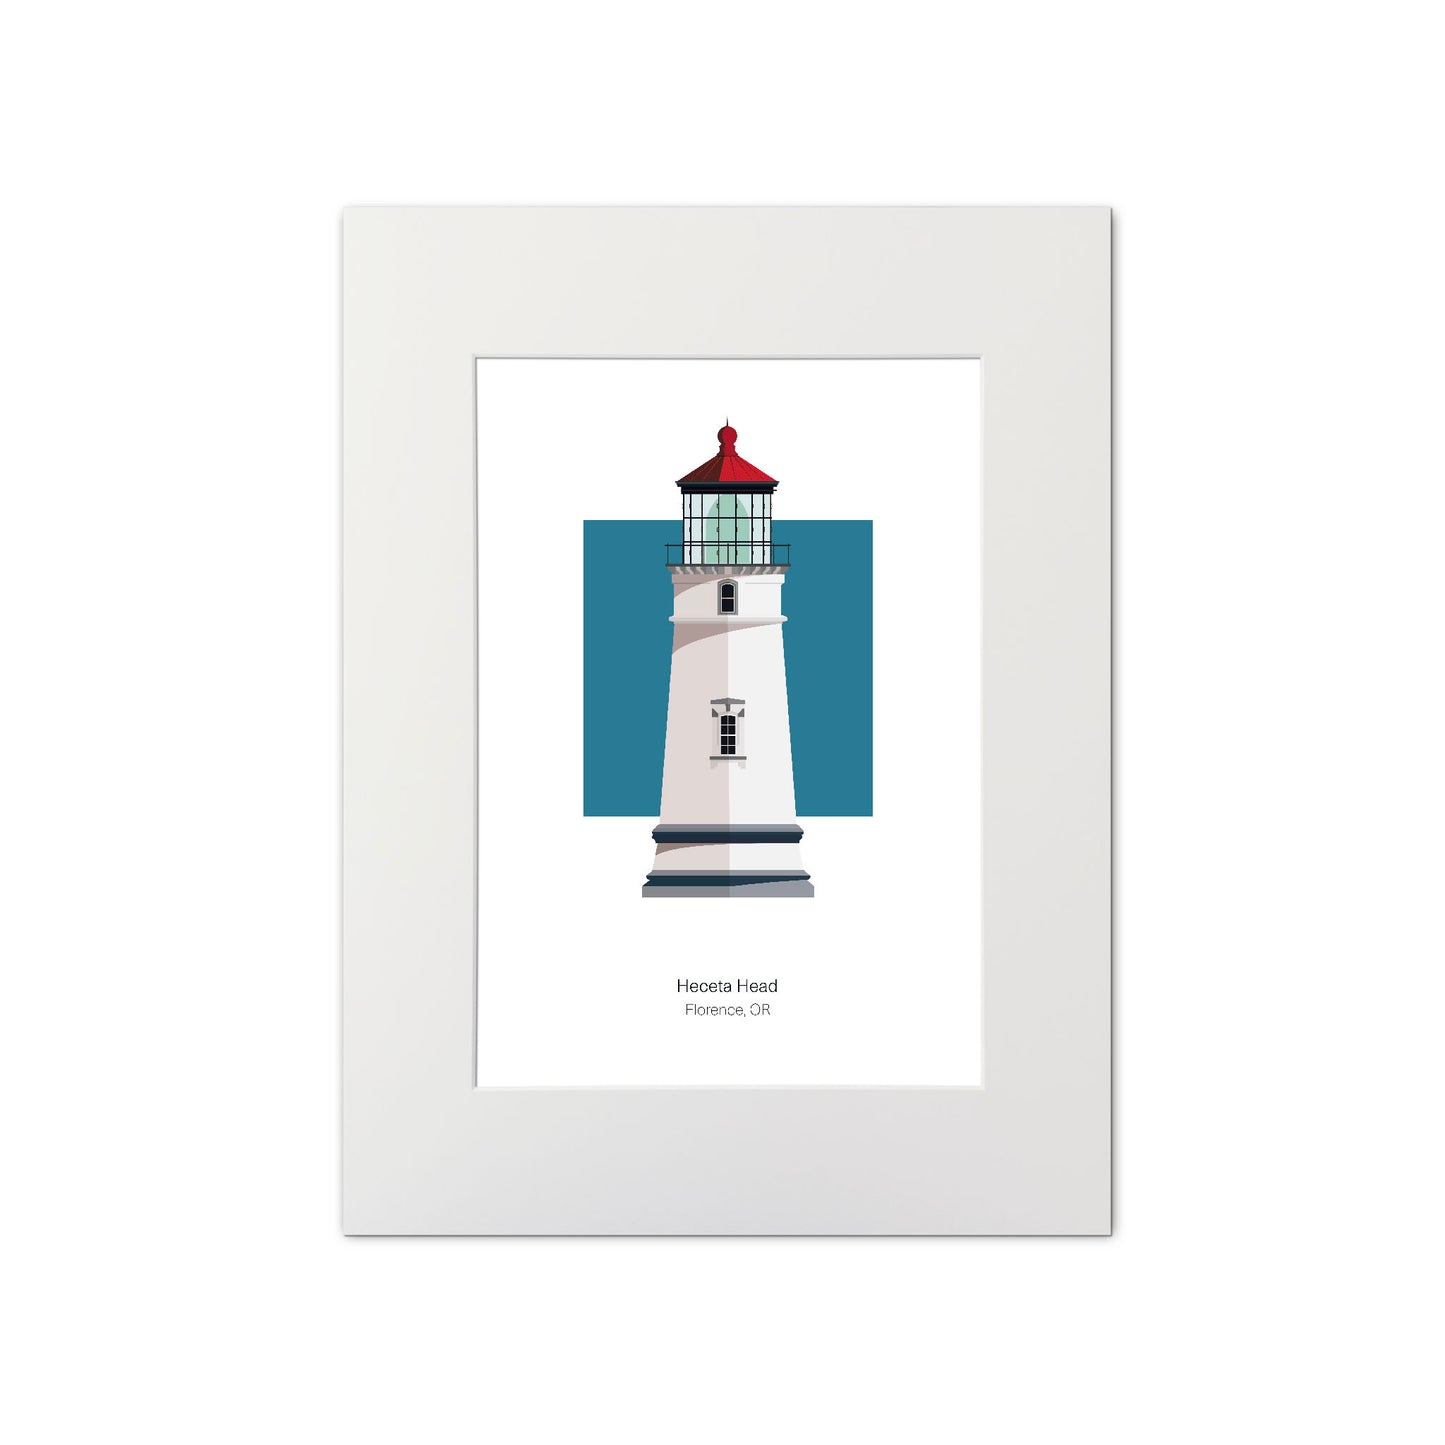 Illustration of the Heceta Head lighthouse, Oregon, USA. On a white background with aqua blue square as a backdrop., mounted and measuring 11"x14" (30x40cm).